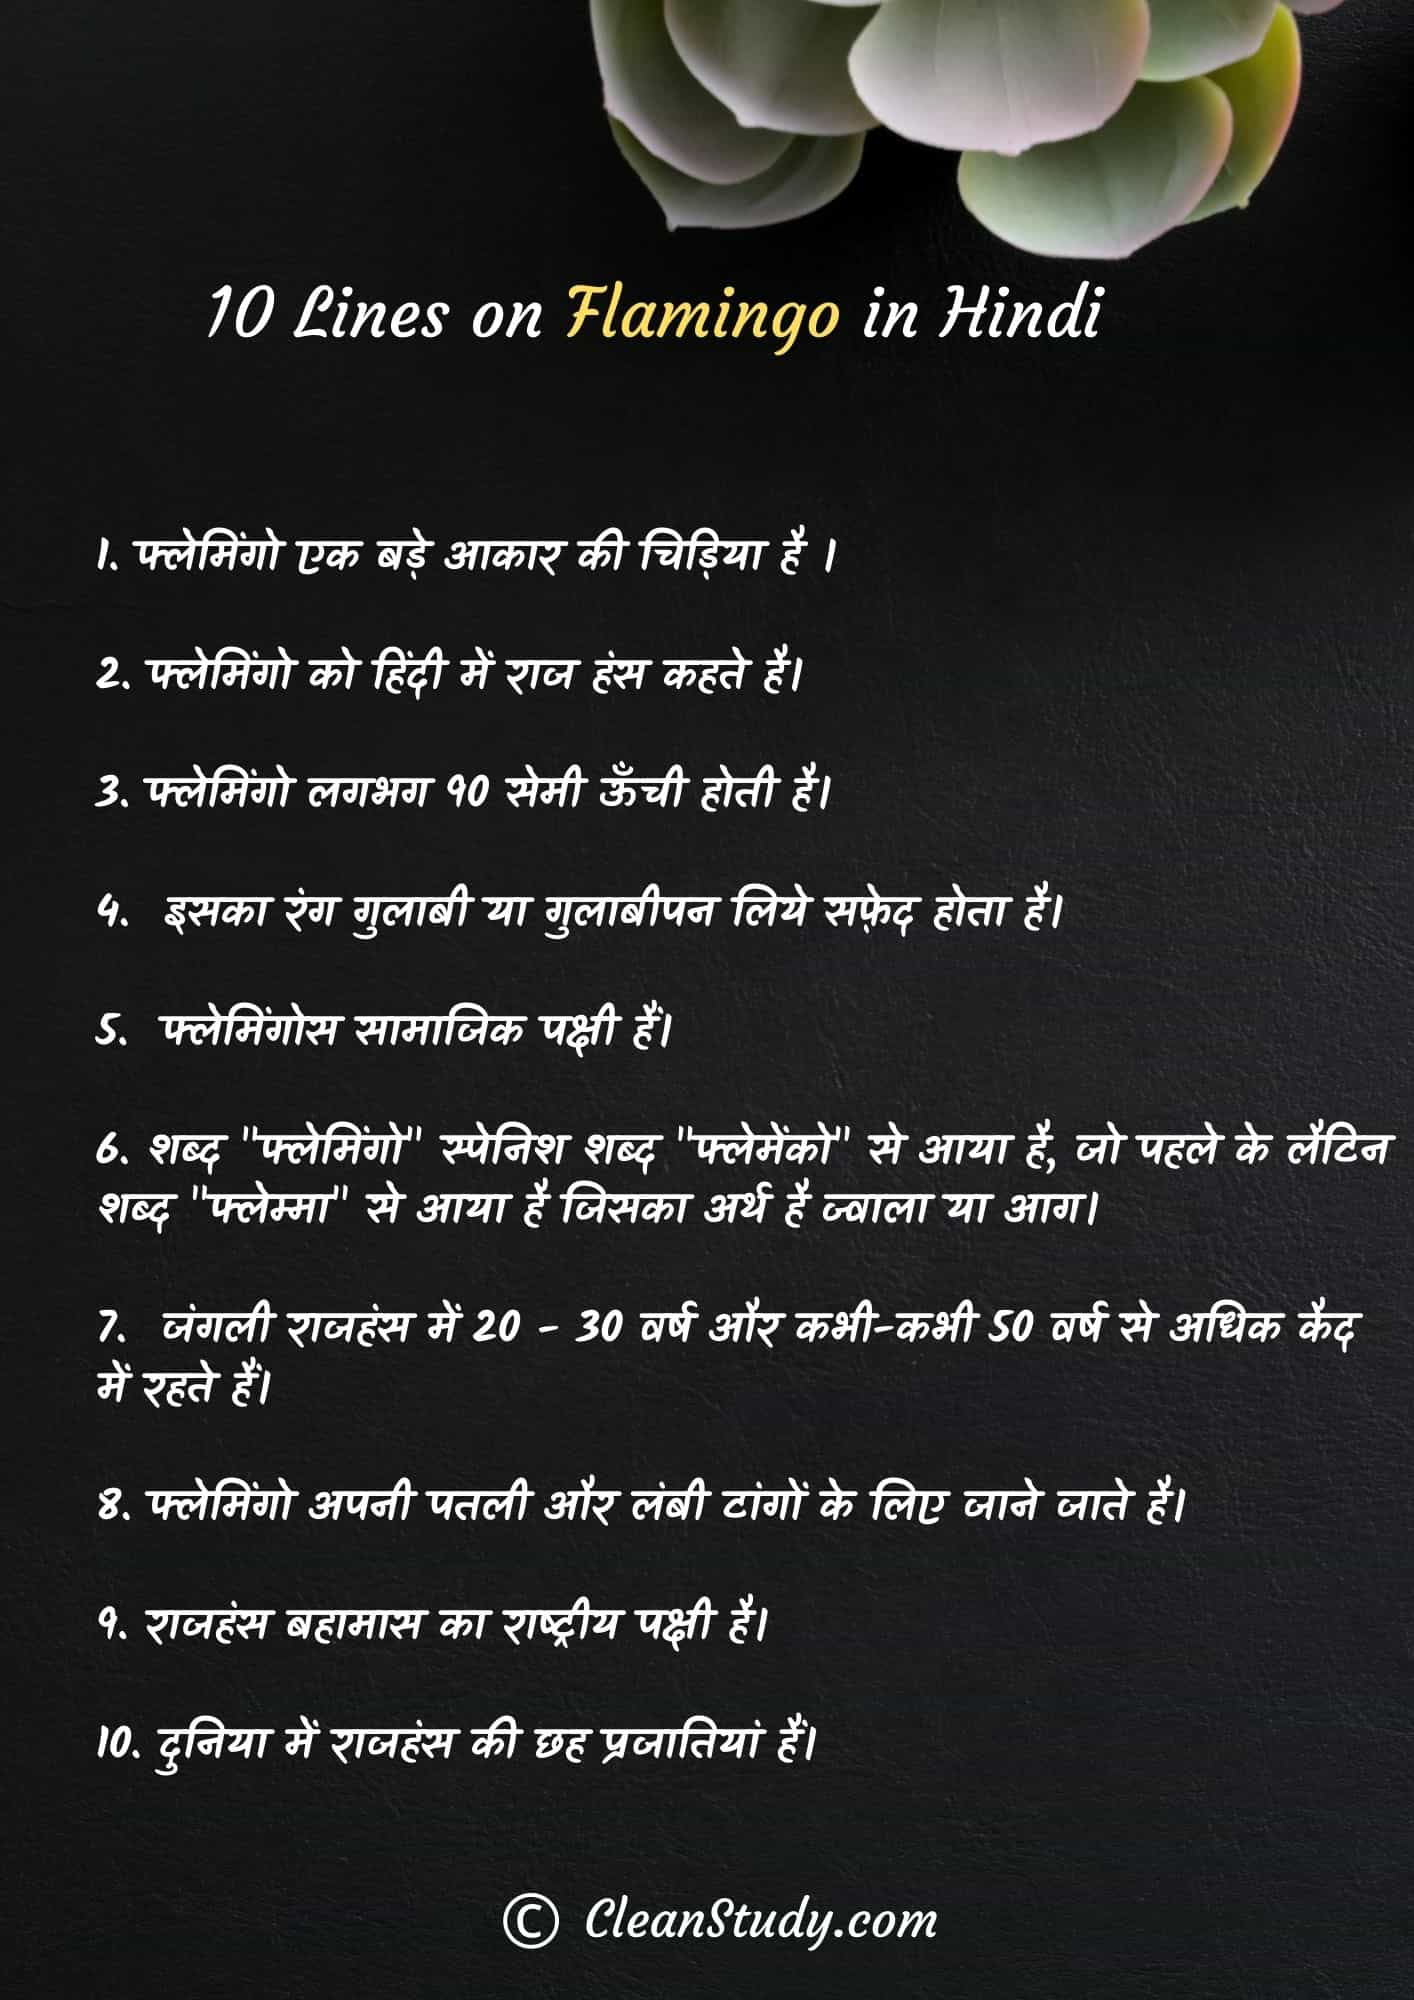 10 Lines on Flamingo in Hindi